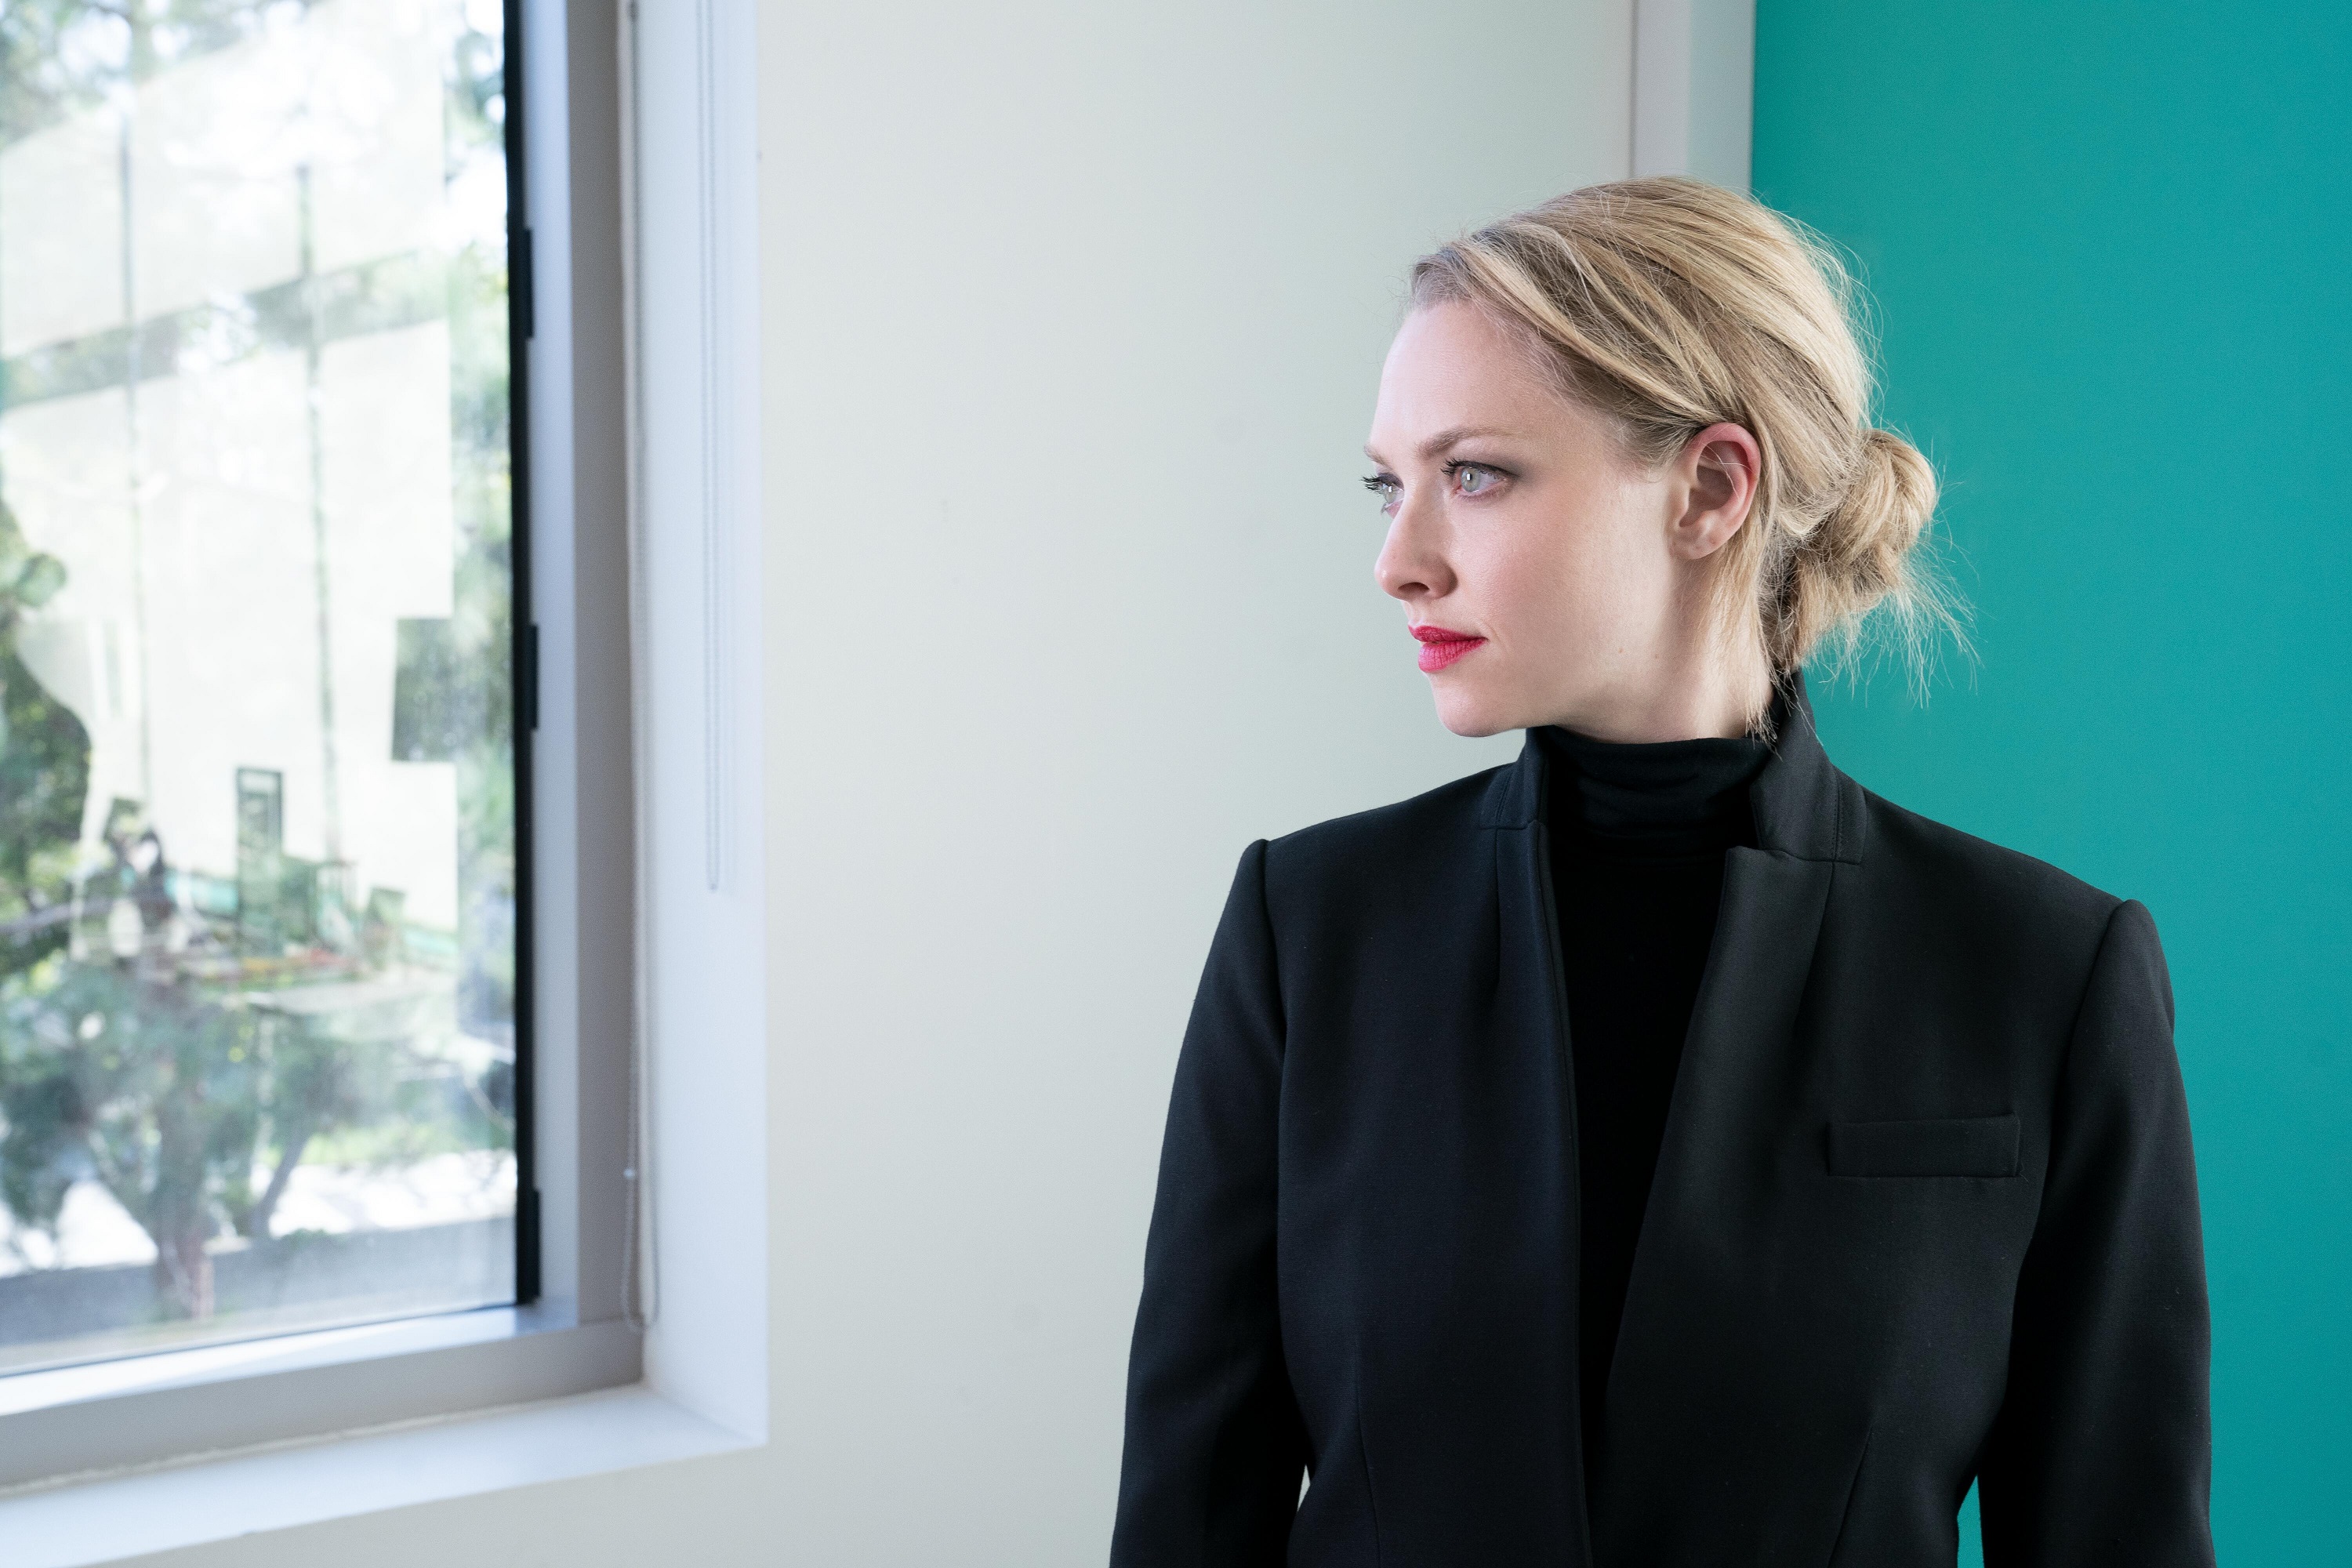 'The Dropout' Amanda Seyfried plays Elizabeth Holmes in her classic black turtle neck